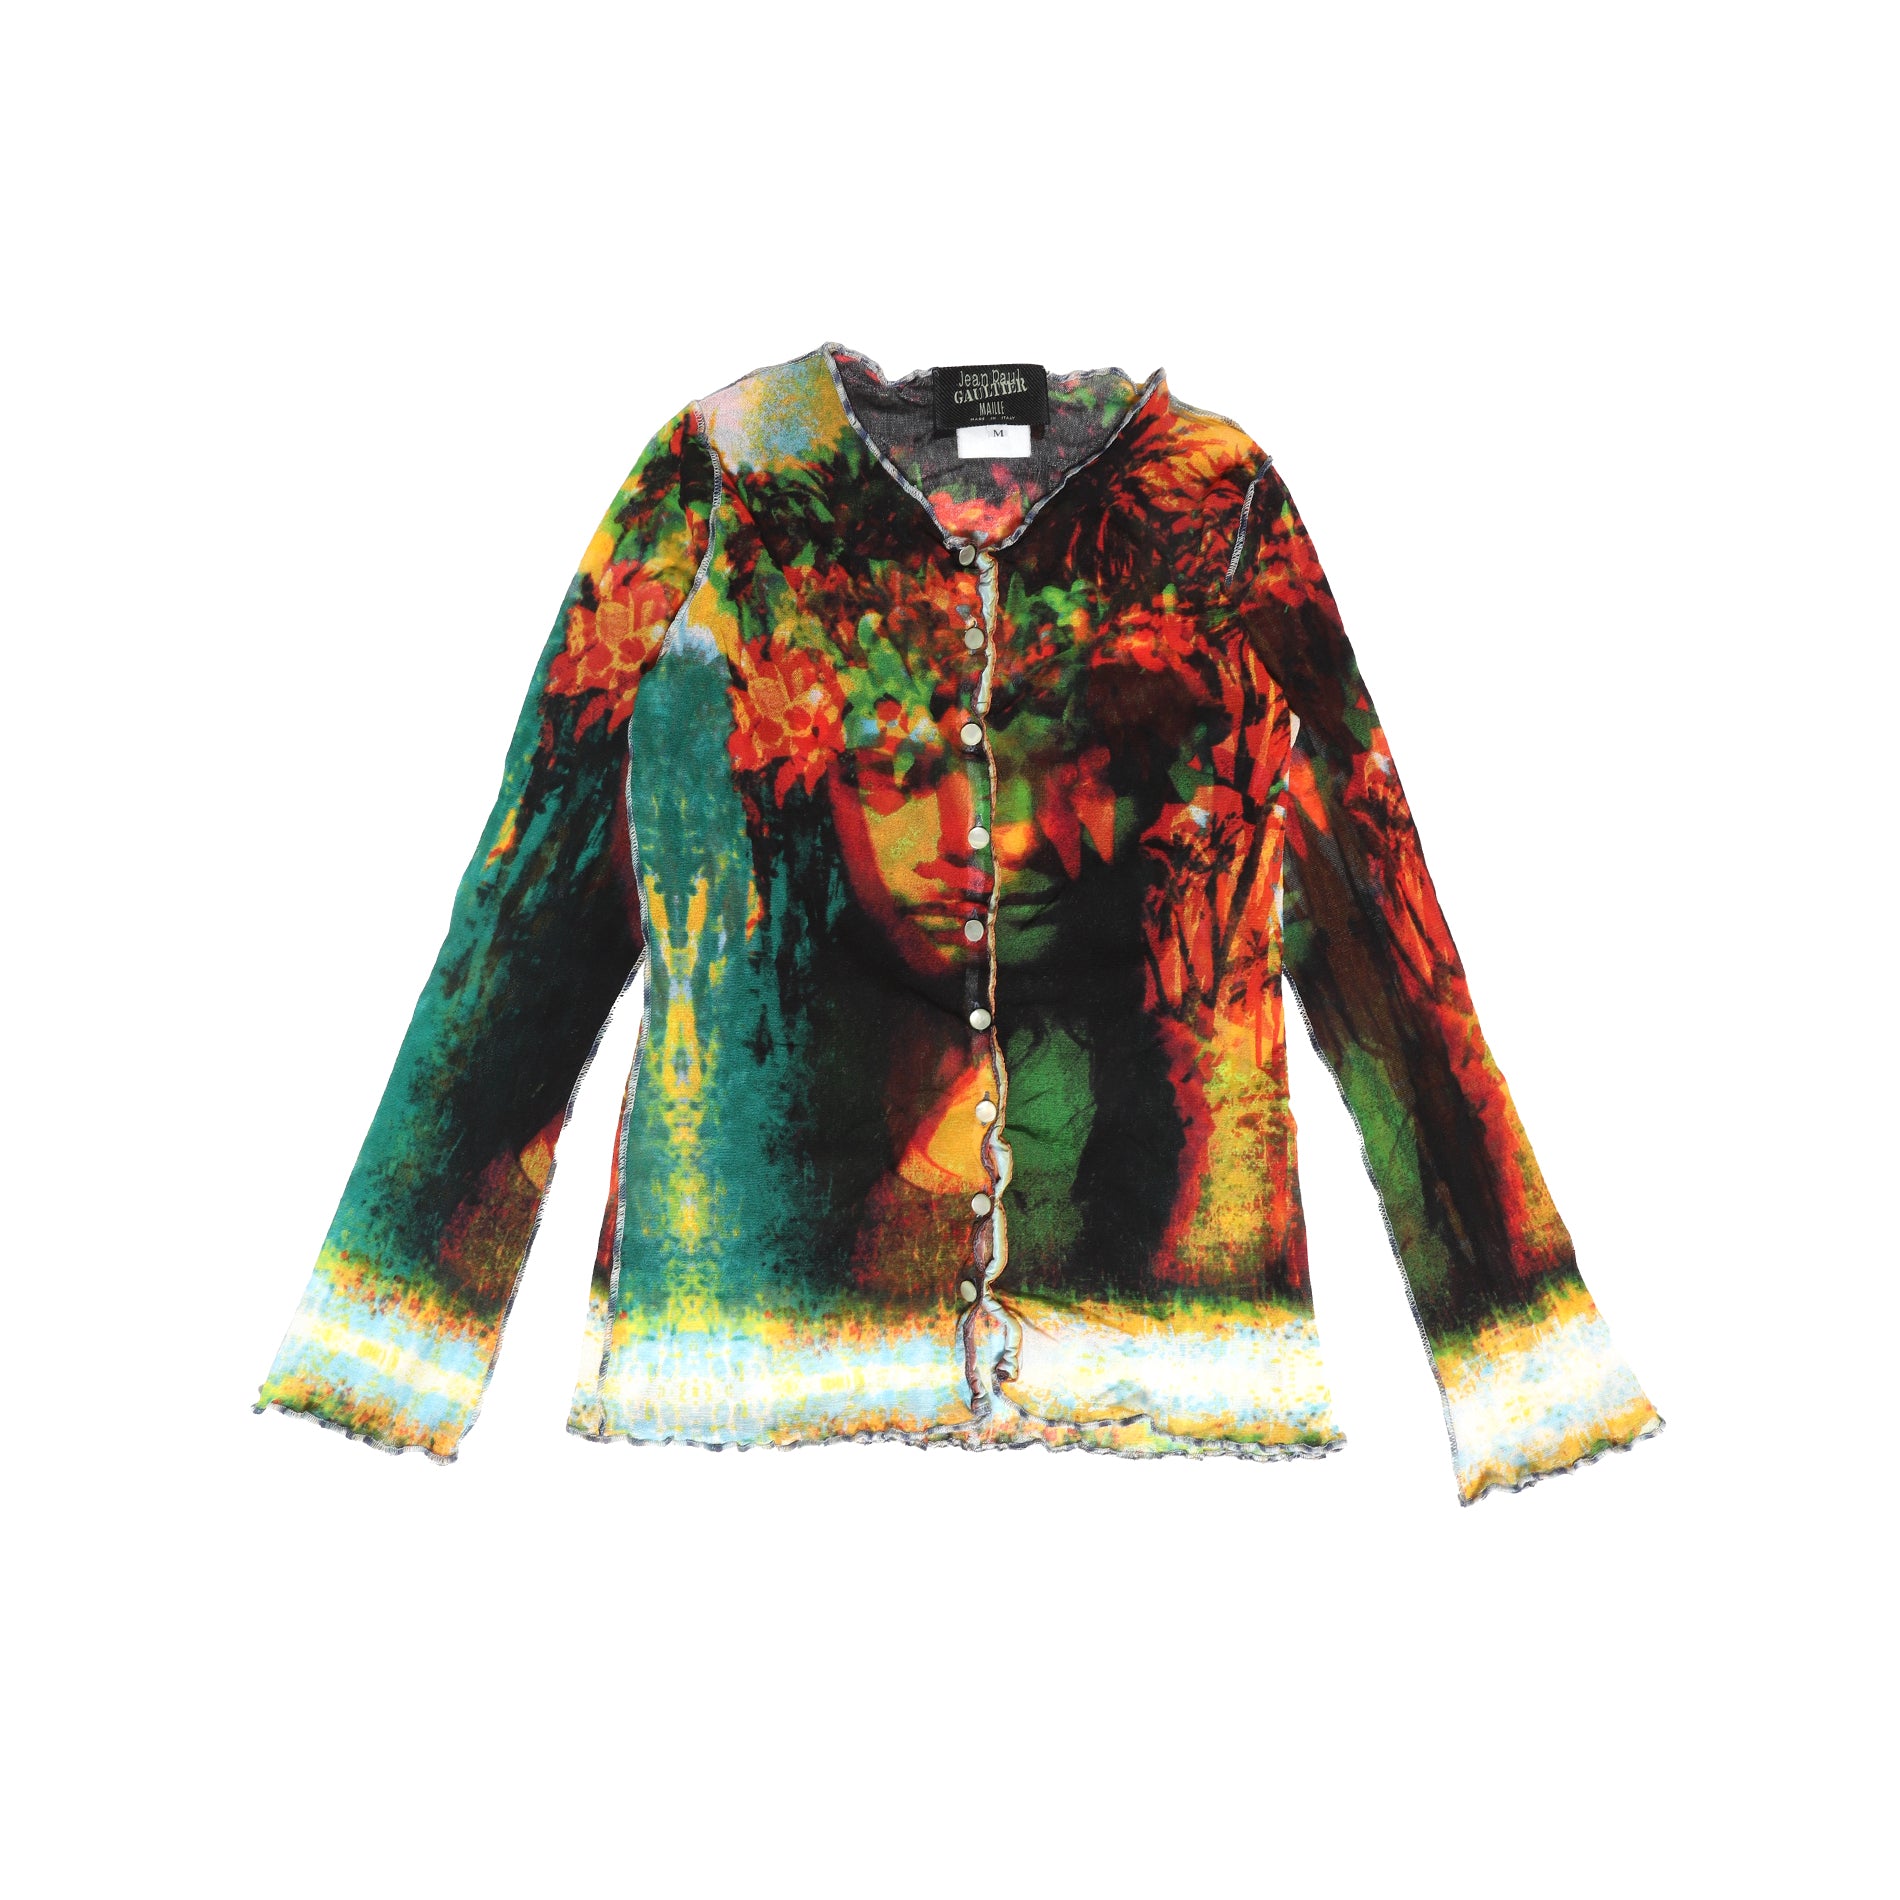 Jean Paul Gaultier SS00 Psychedelic Mesh Blouse